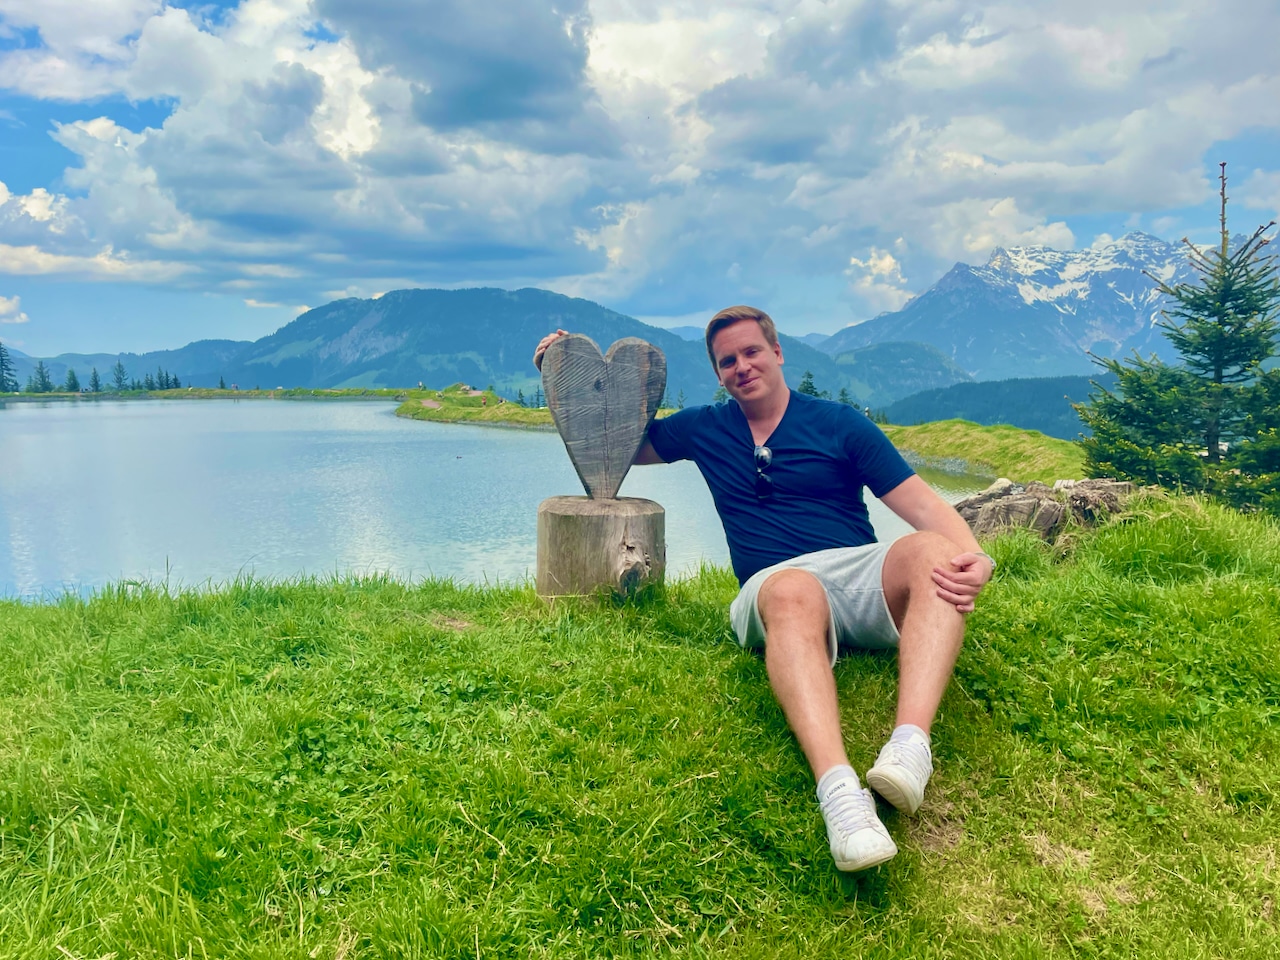 After our holiday we rave about the Pillerseetal - and are already planning our next trip to Tyrol. Travel Report Fieberbrunn Pillerseetal experiences tips sights activities